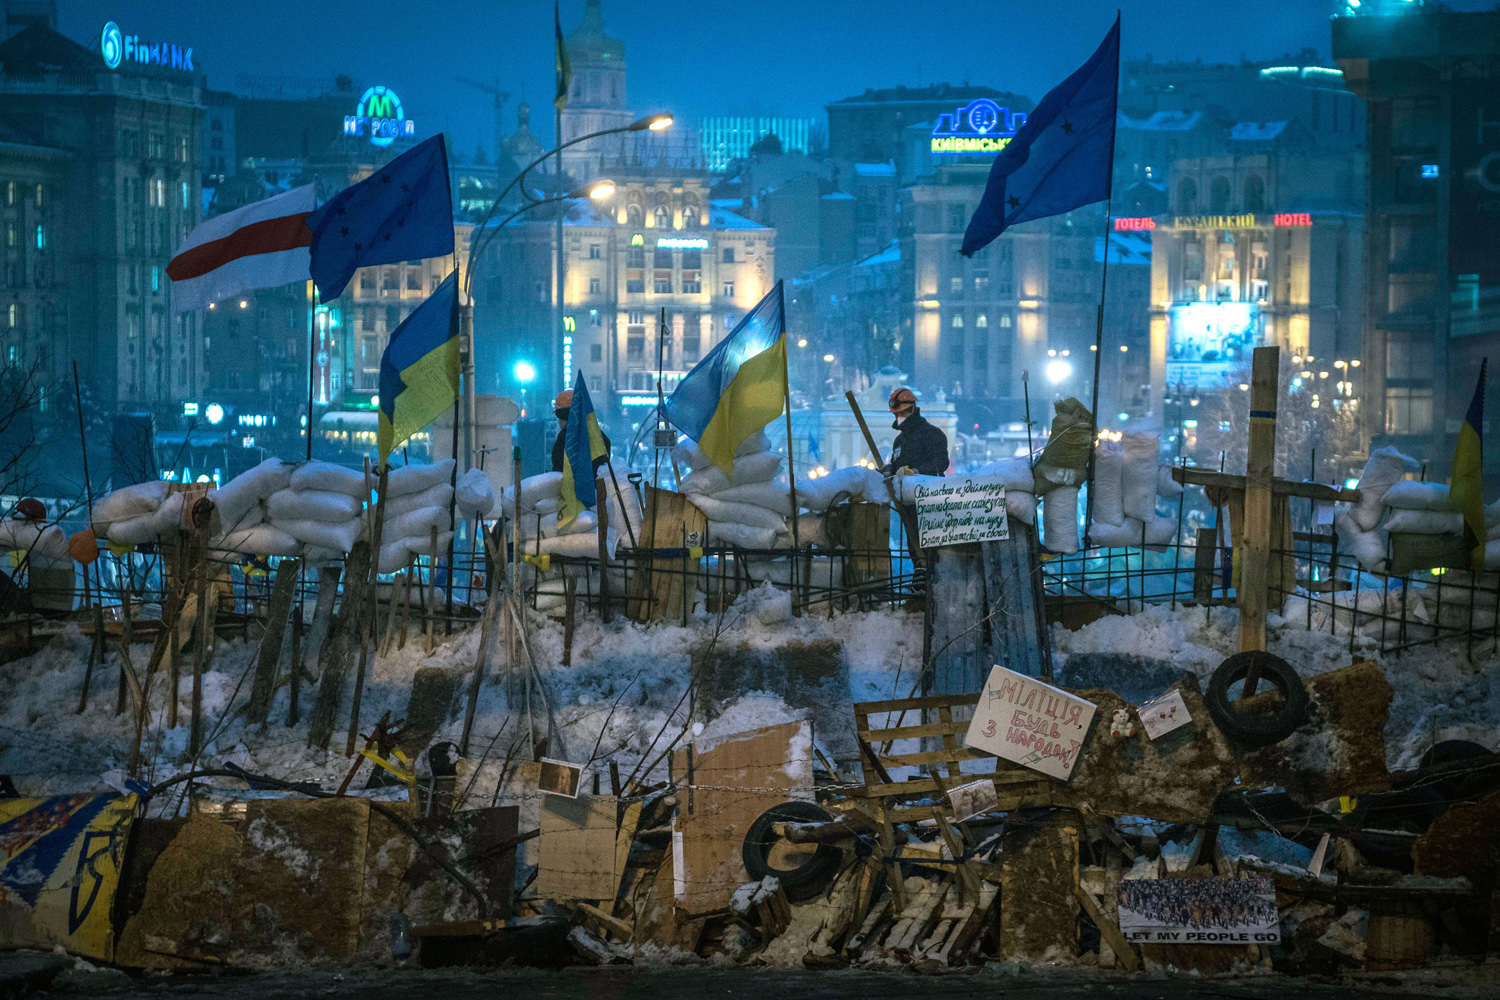 Ukrainian and European Union flags fly over the newly-erected barricades at Independence Square in Kiev, Ukraine.